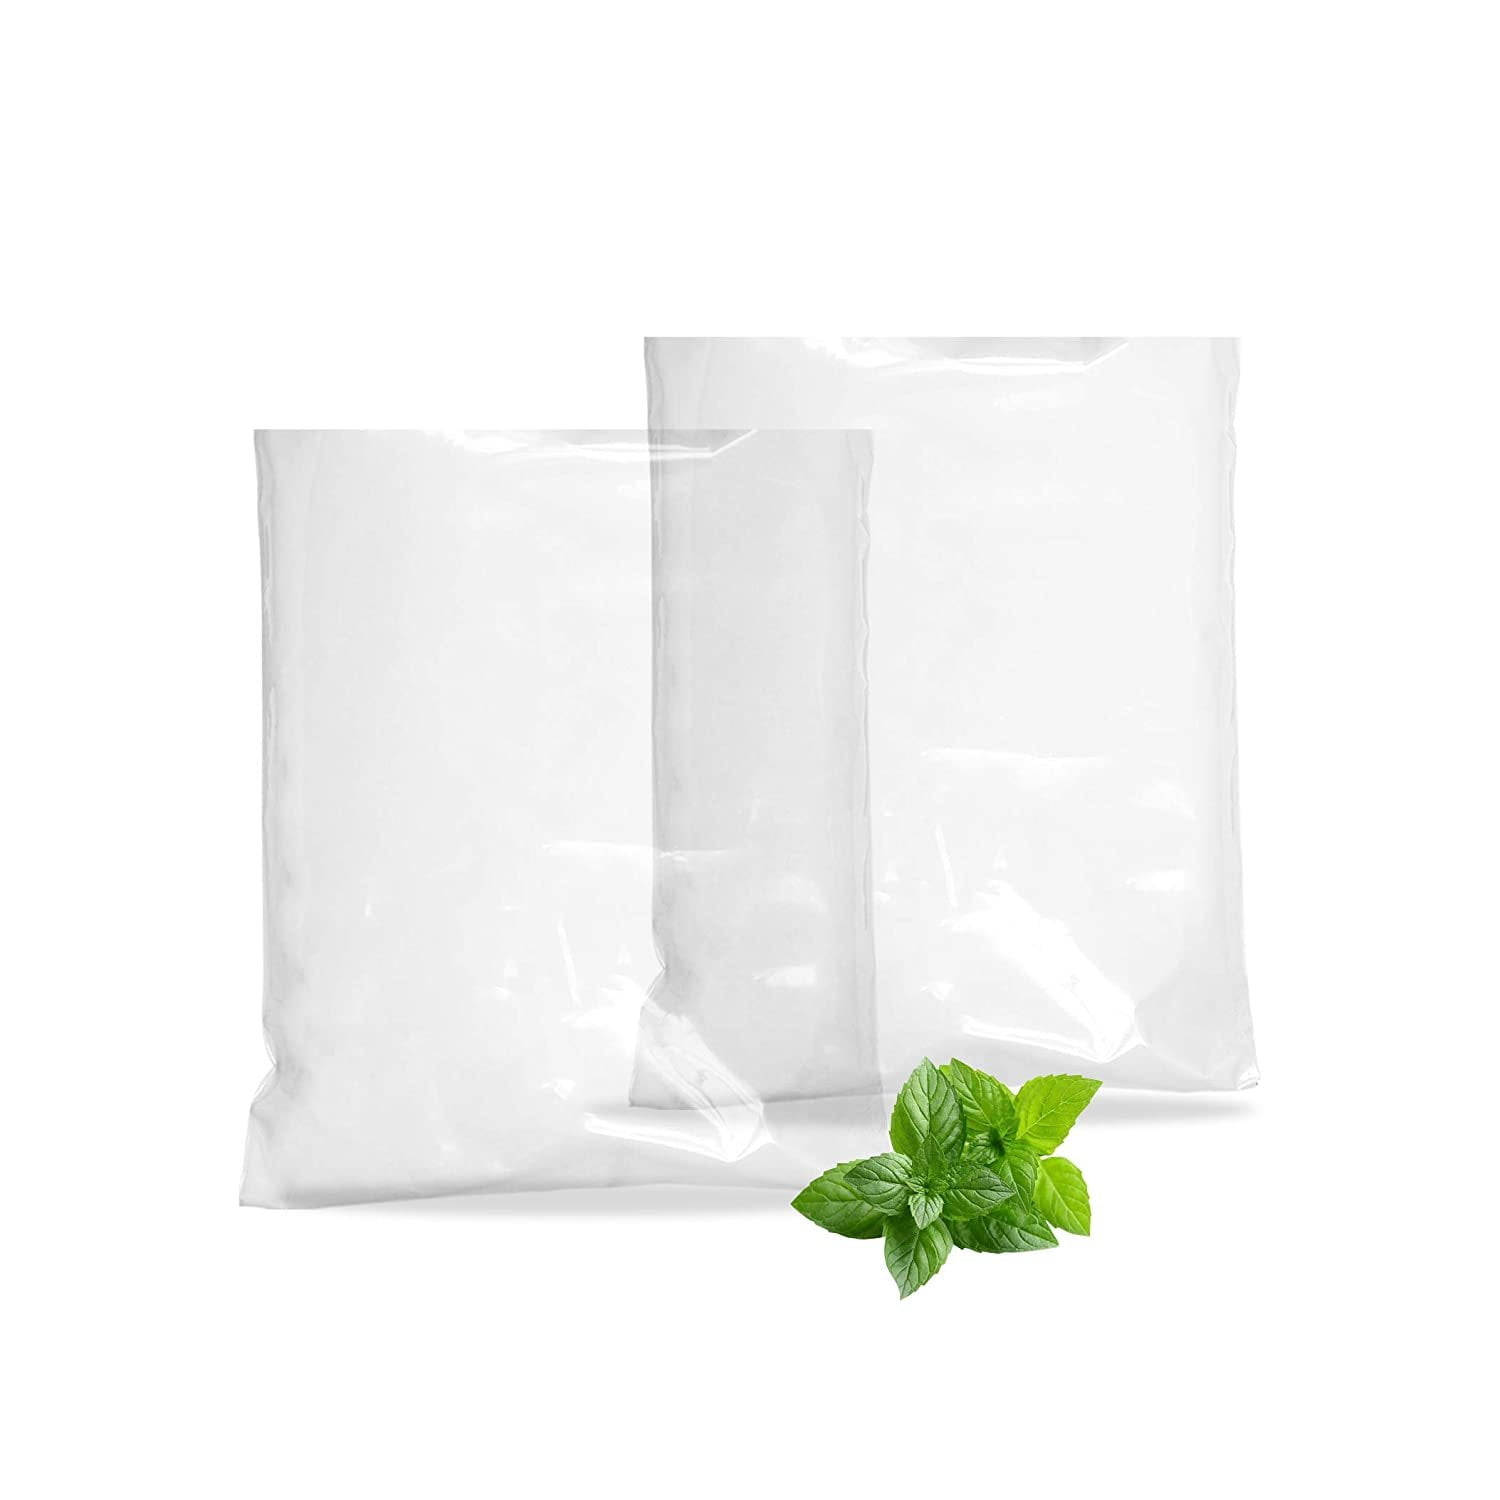 9 x 12 3 mil - Clear Plastic Flat Open Poly Bag | MagicWater Supply Brand 100 Pack 